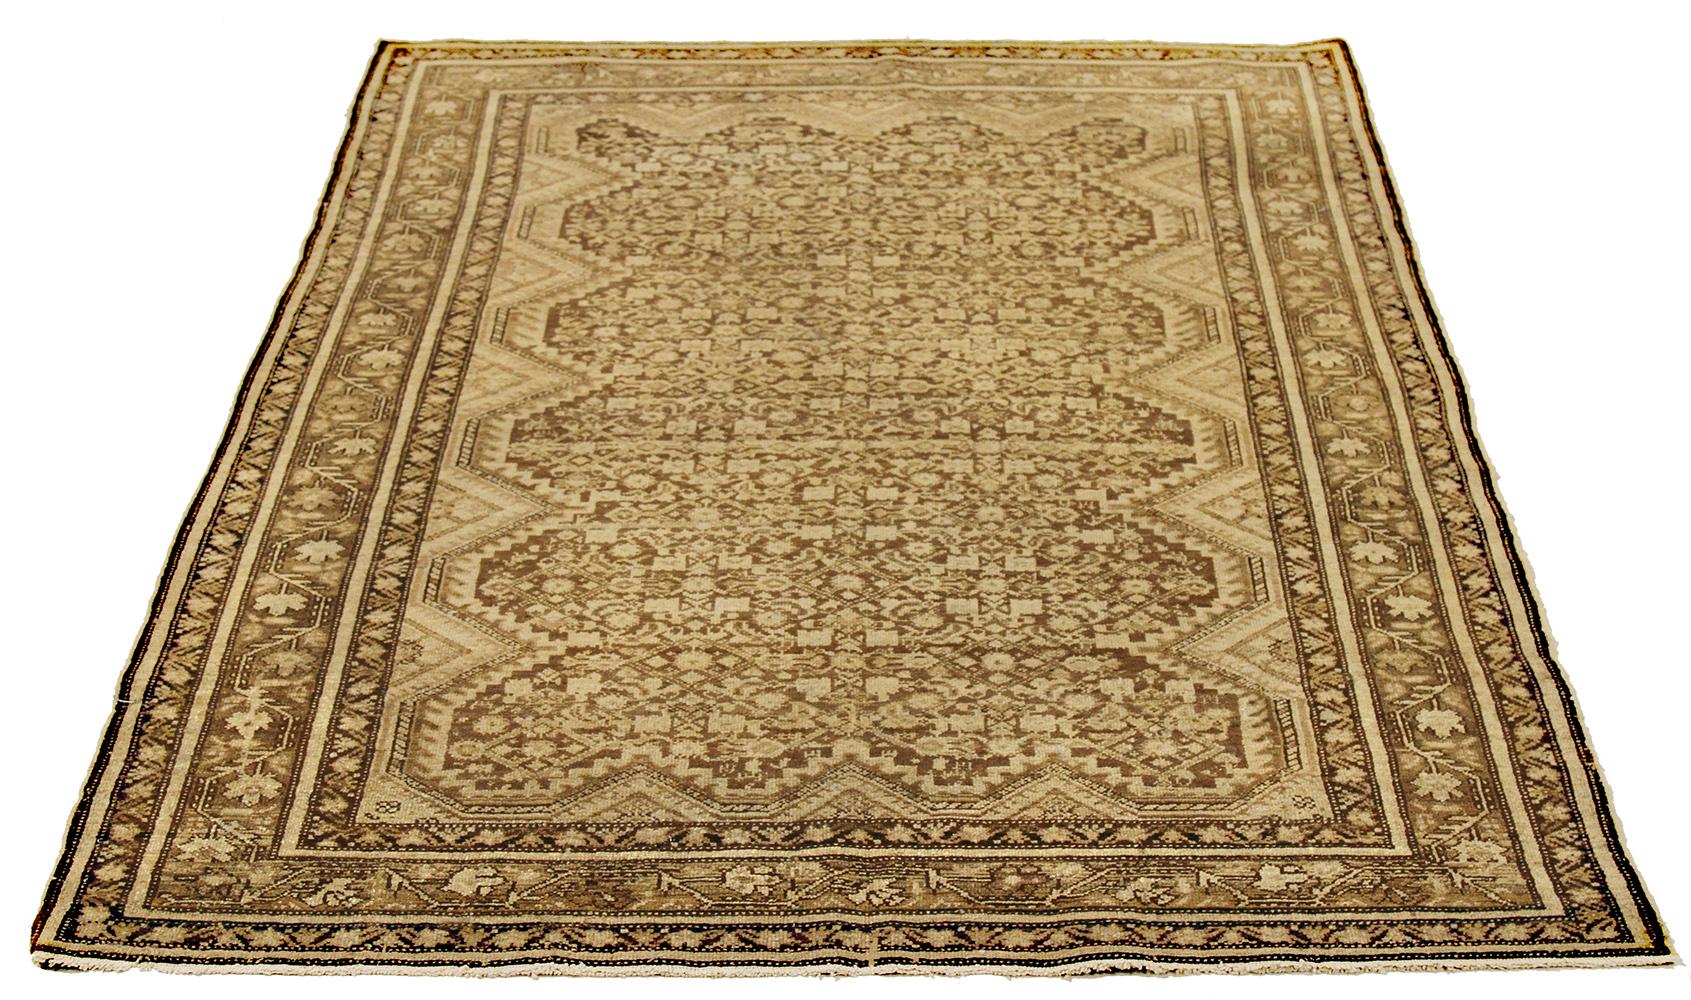 Antique Persian runner rug handwoven from the finest sheep’s wool and colored with all-natural vegetable dyes that are safe for humans and pets. It’s a traditional Malayer design featuring ivory and beige botanical details over a brown field. It’s a